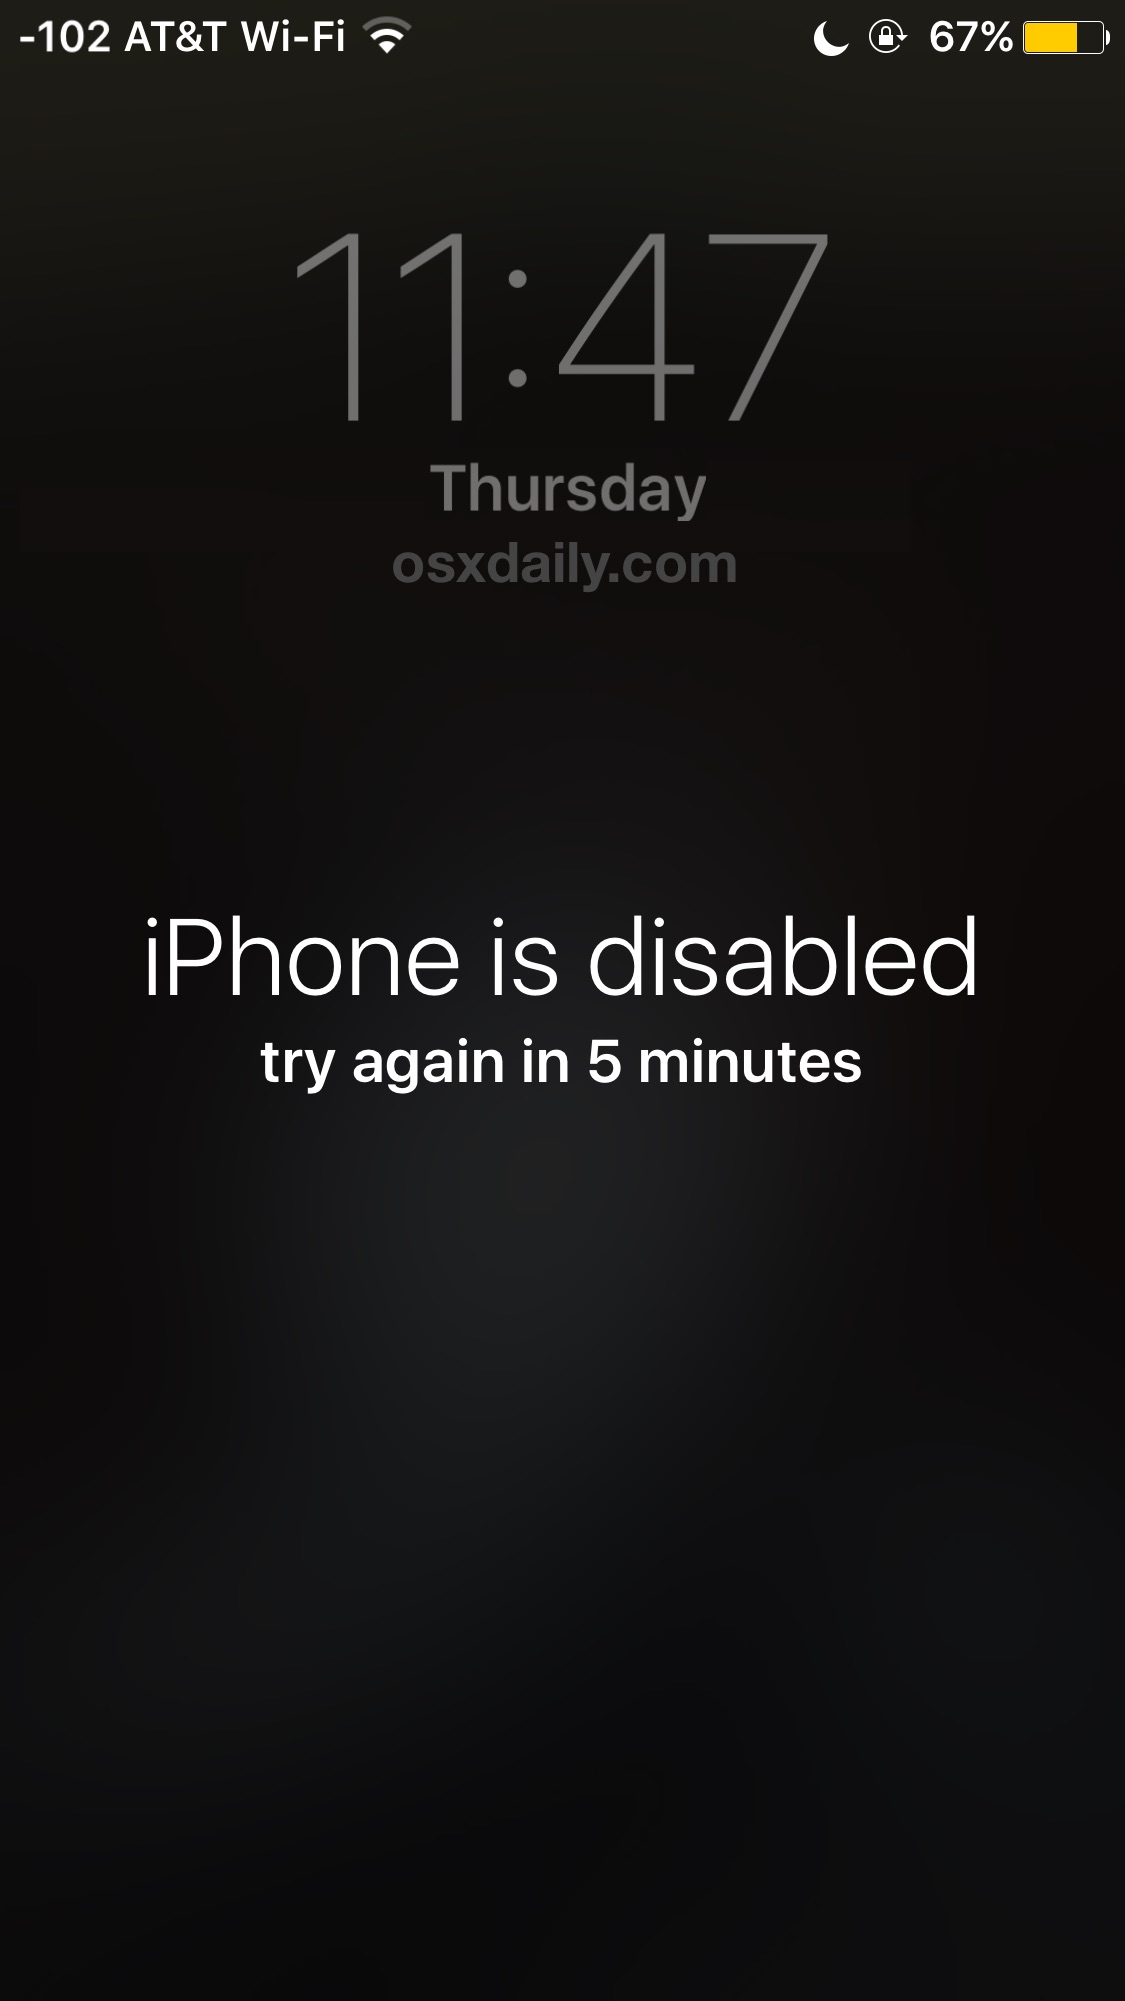 iphone has disabled error message